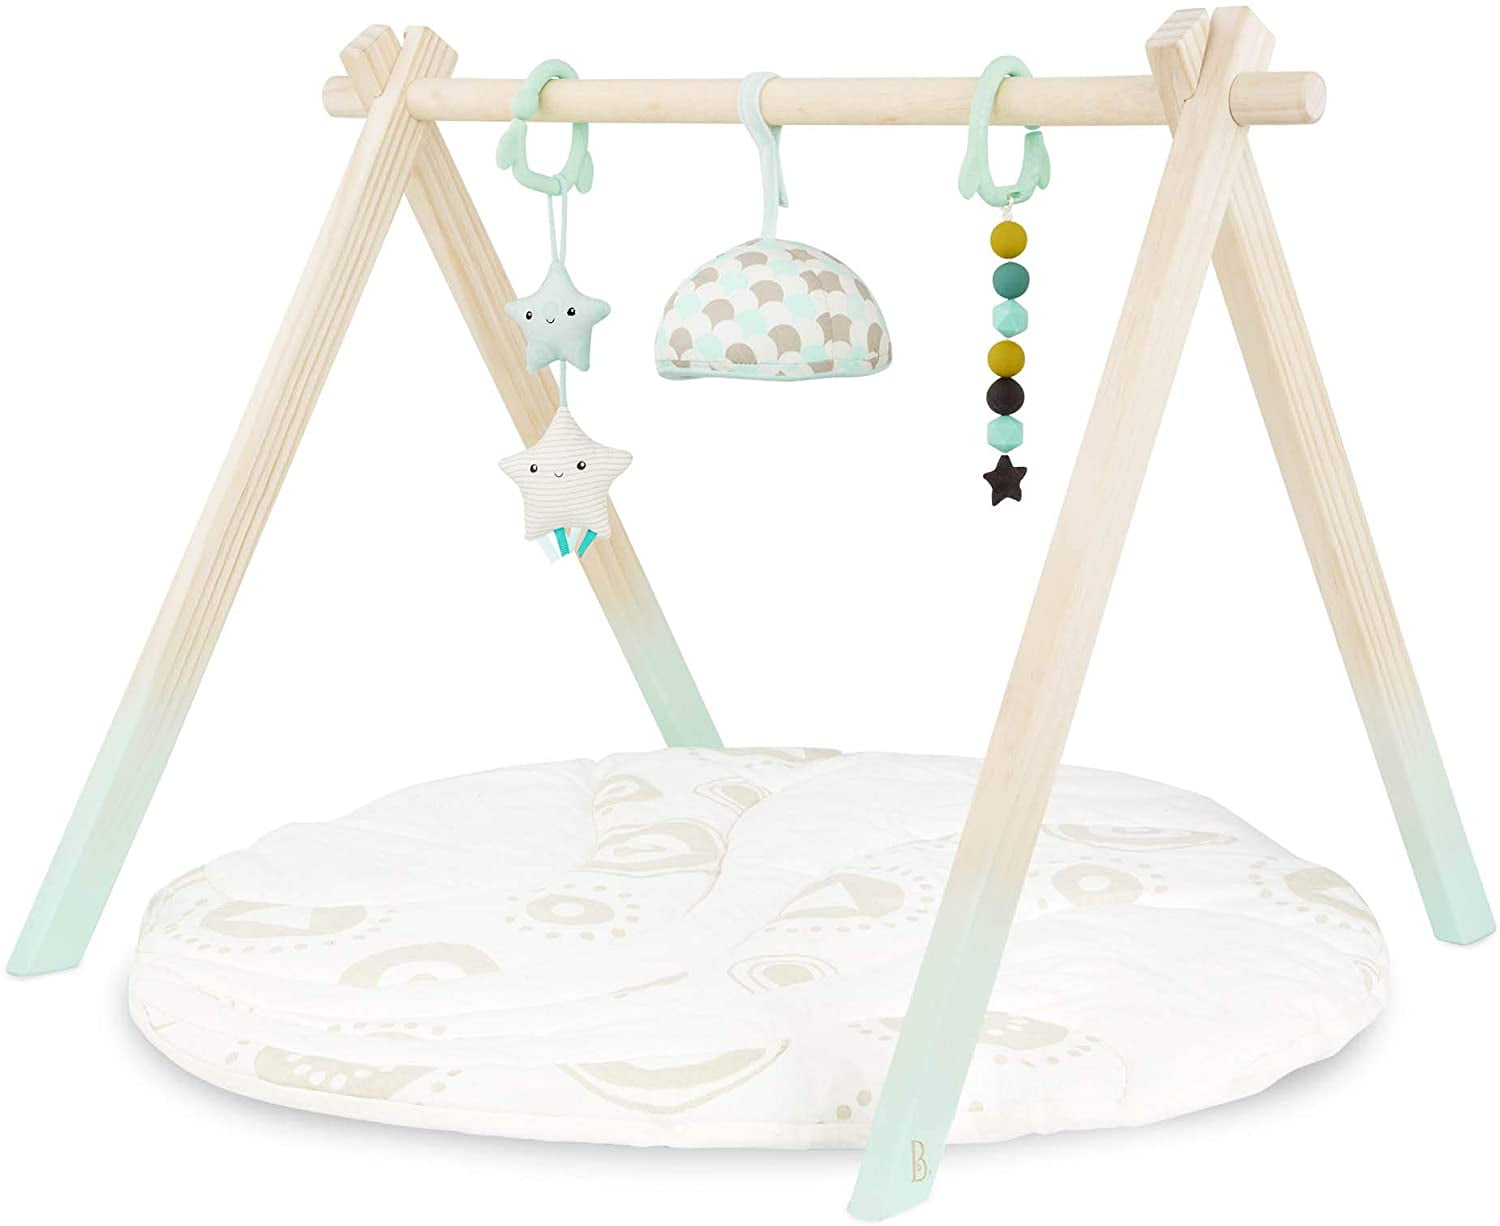 3 Toys Wooden Baby Gym Play Activity 